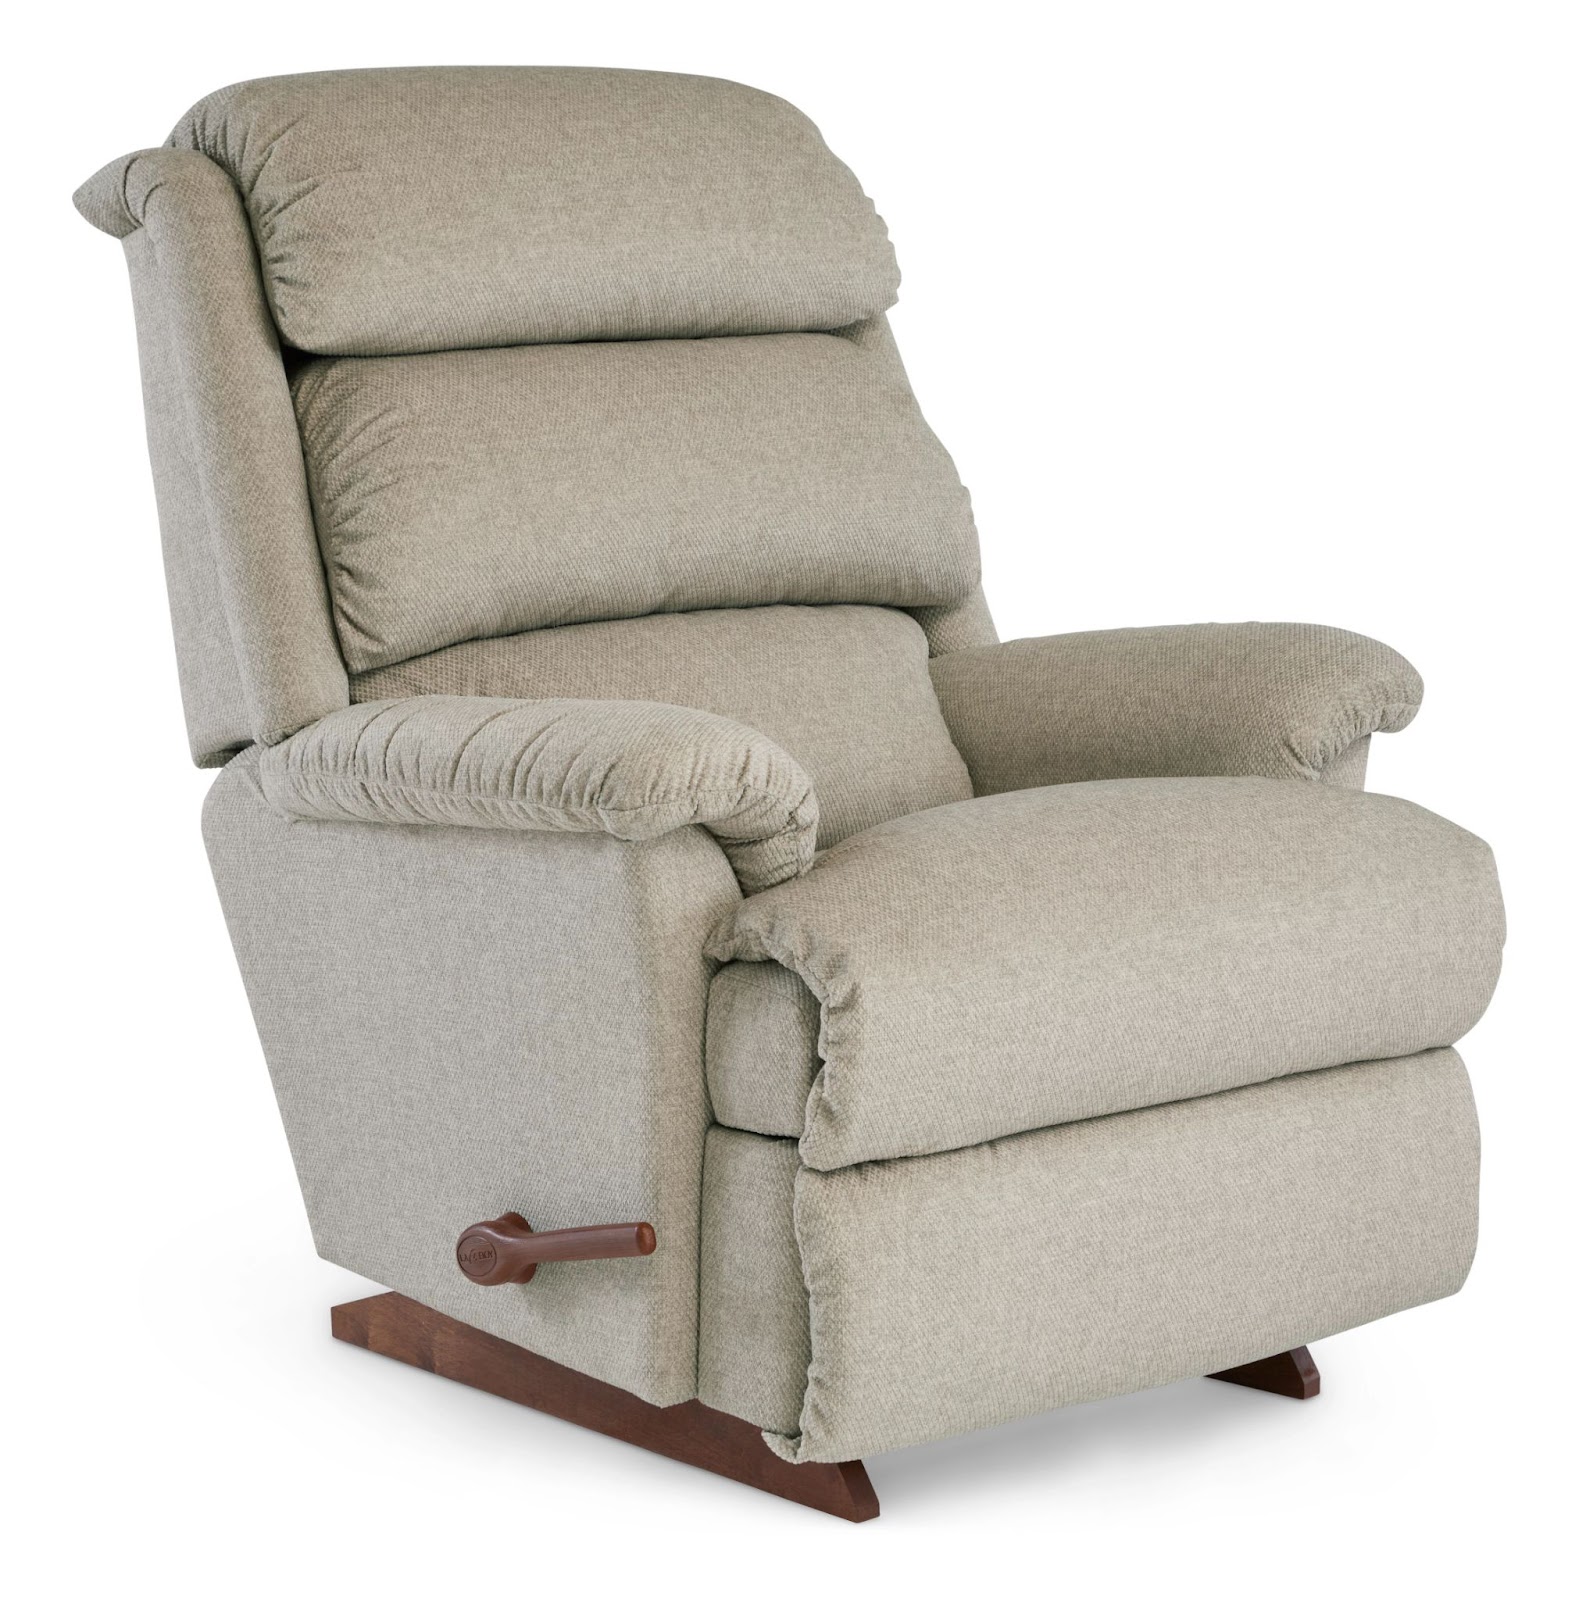 Astor fauteuil inclinable